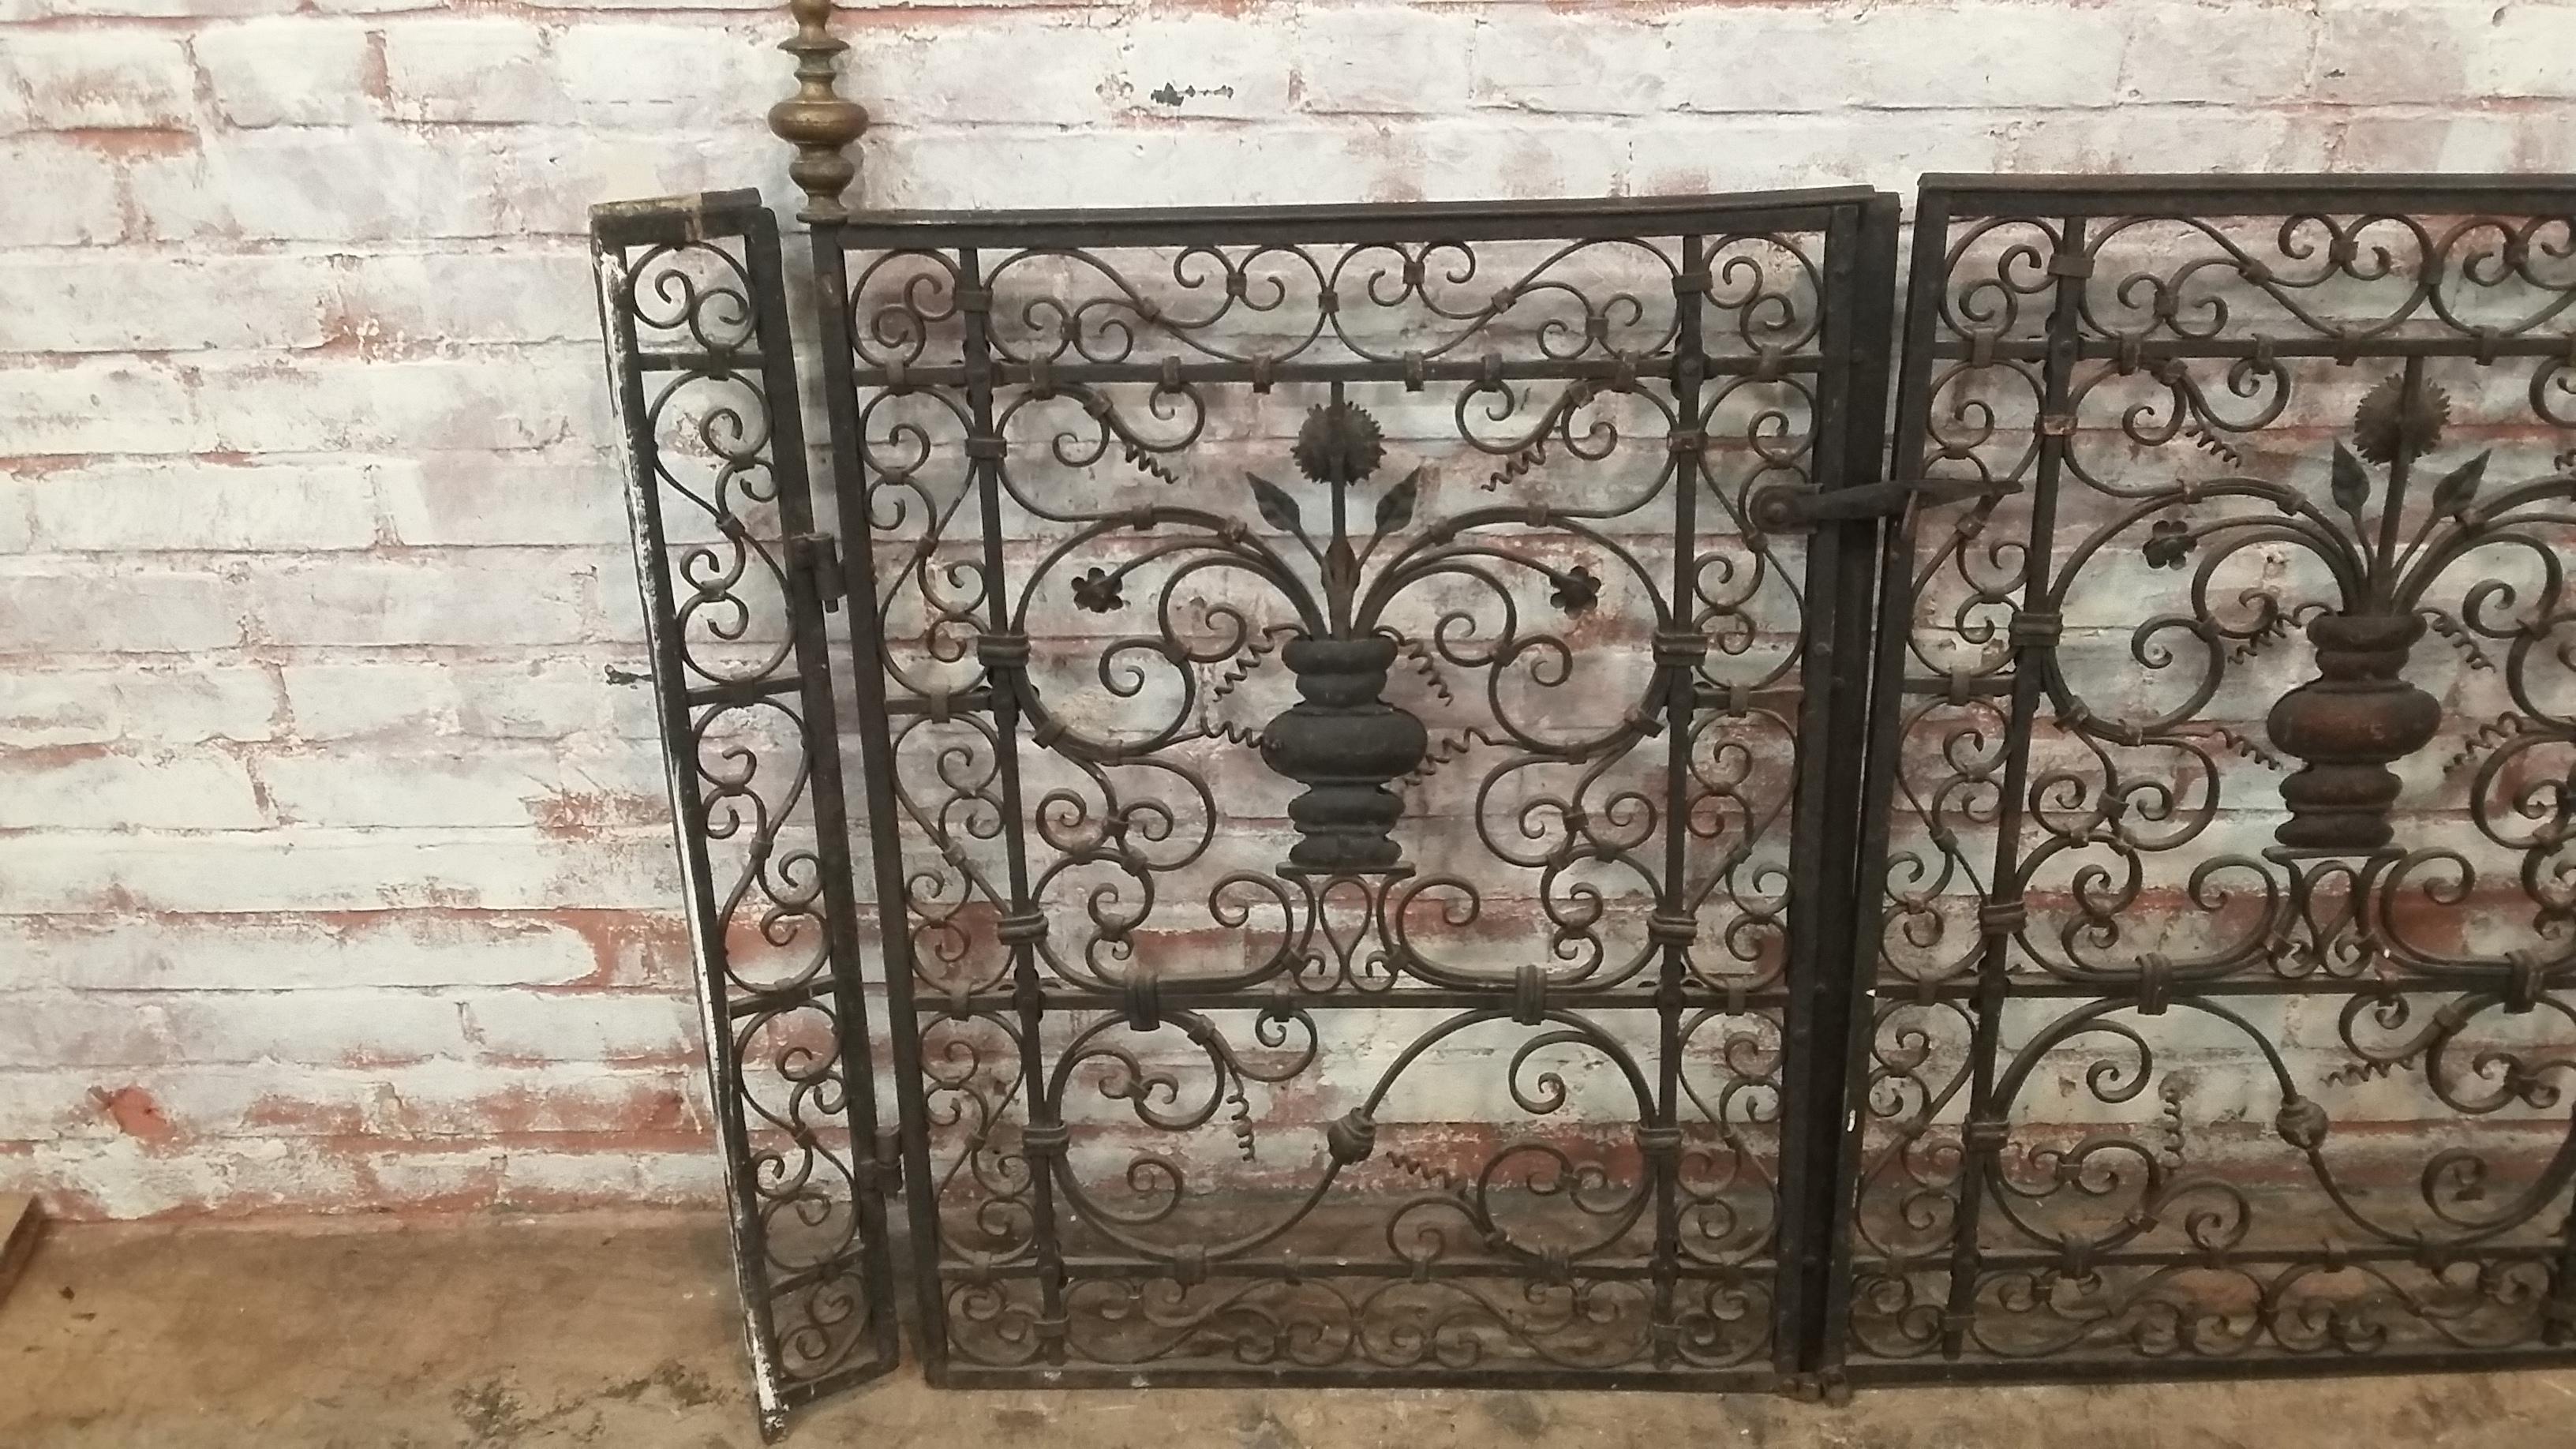 Very ornate set of small wrought iron garden gates. Decorative urn with flowers in the center. Great workmanship on the set. Each side has a small return 4